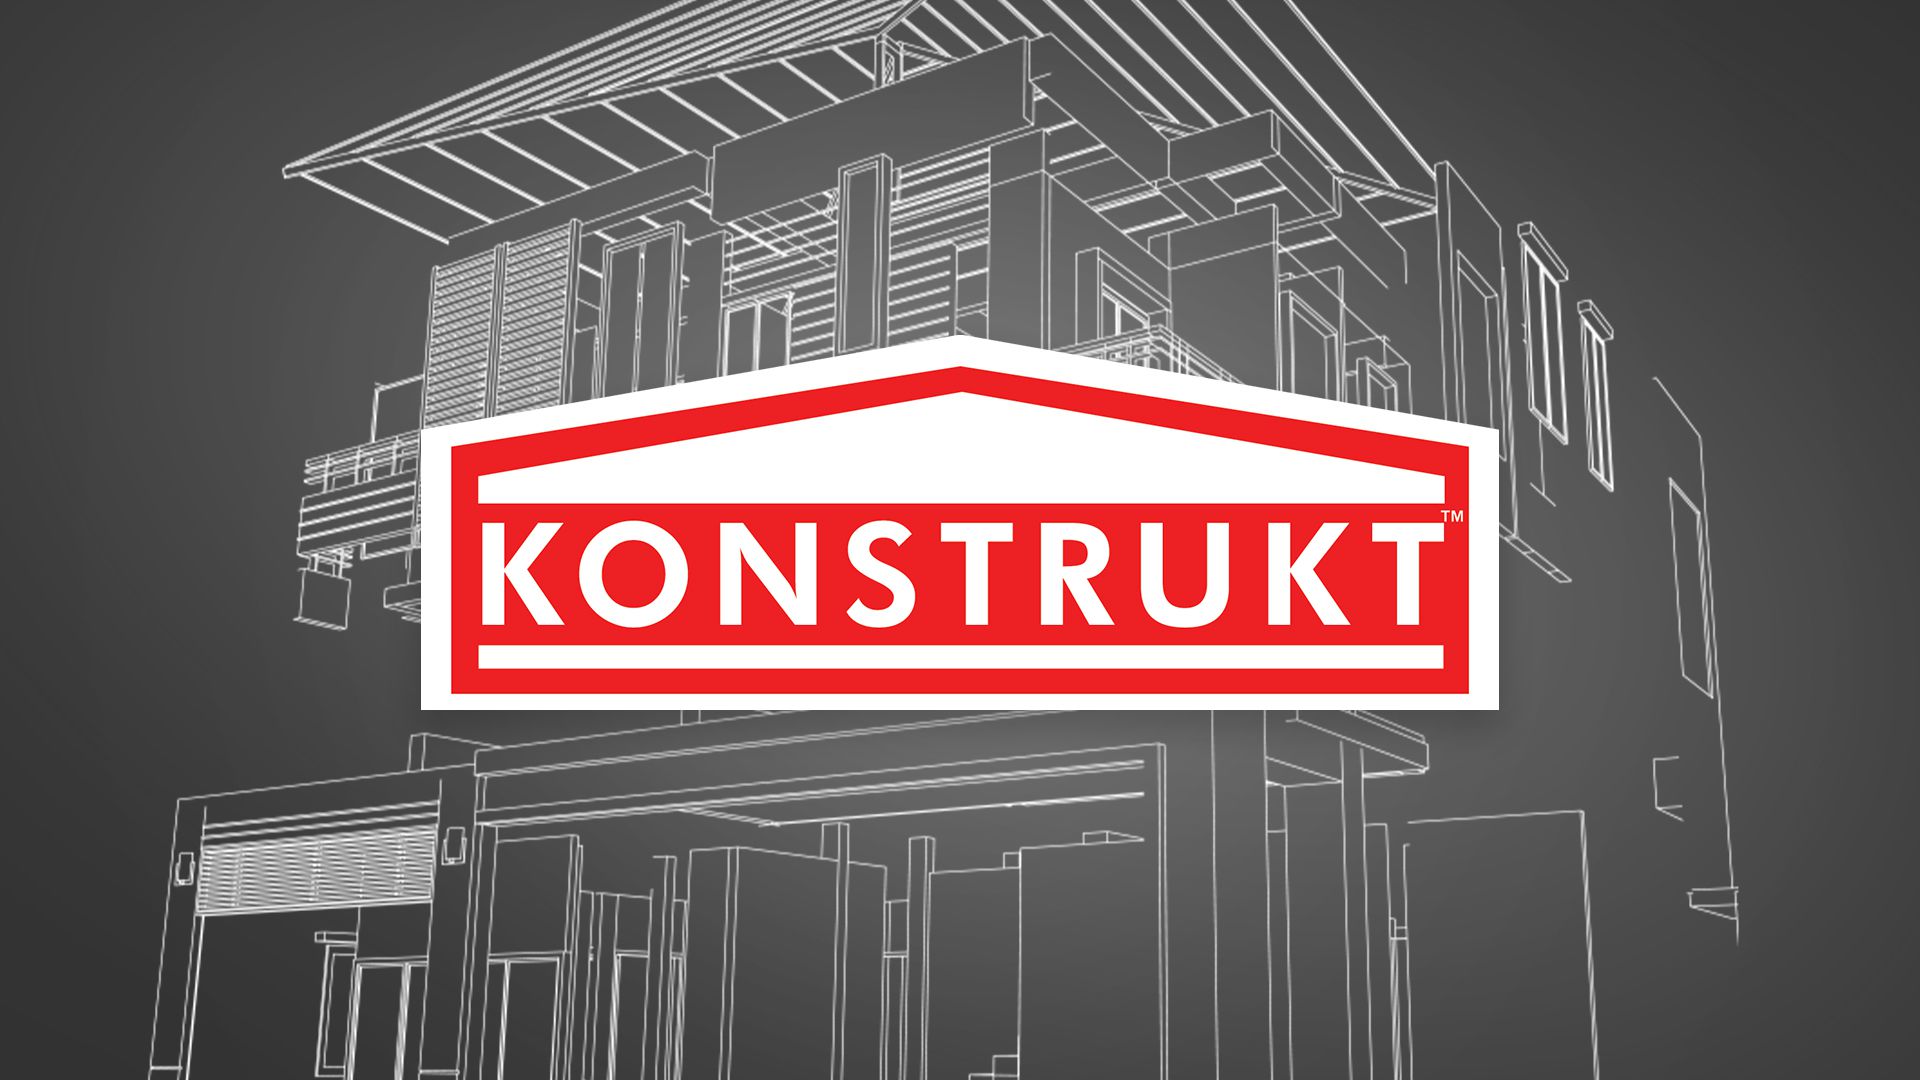 How to Apply Konstrukt Tileworks K-302 All-purpose Tile Adhesive and K-321 Tile Adhesion Promoter